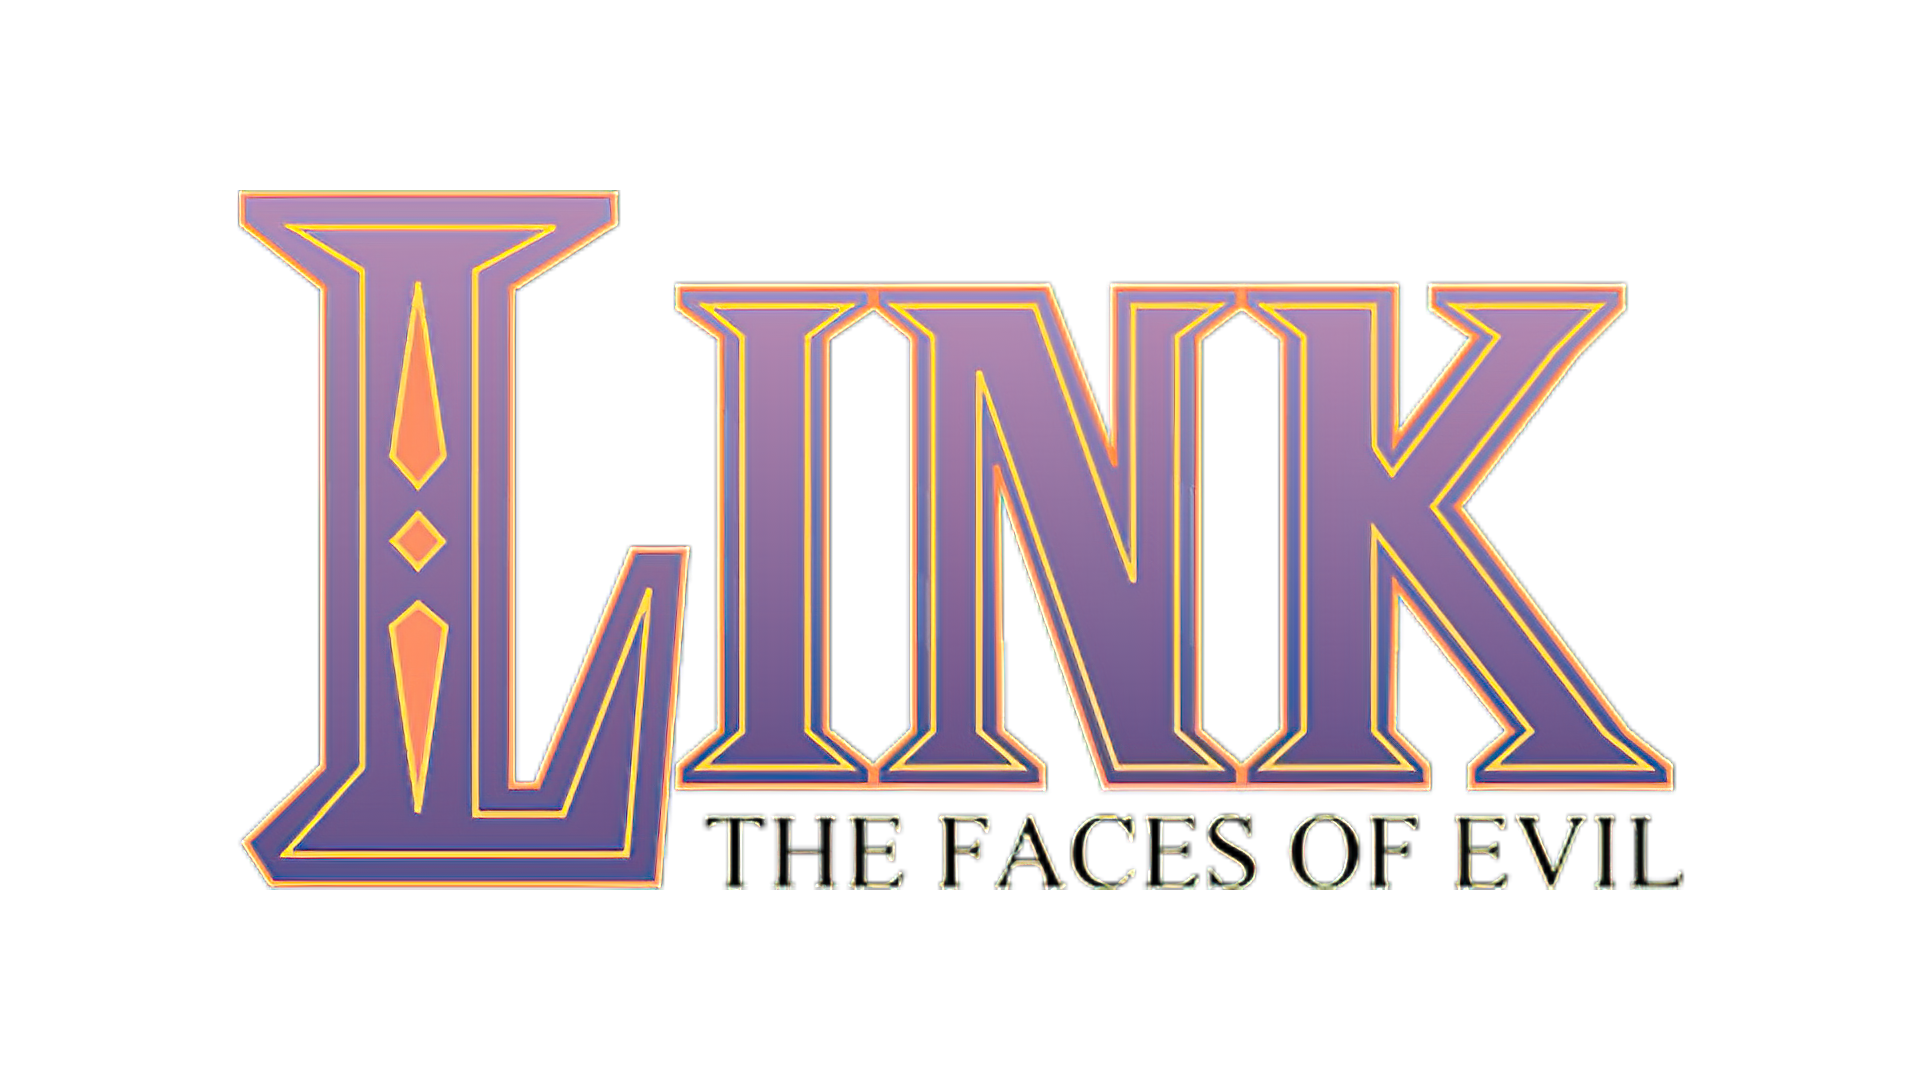 Link: The Faces of Evil Logo